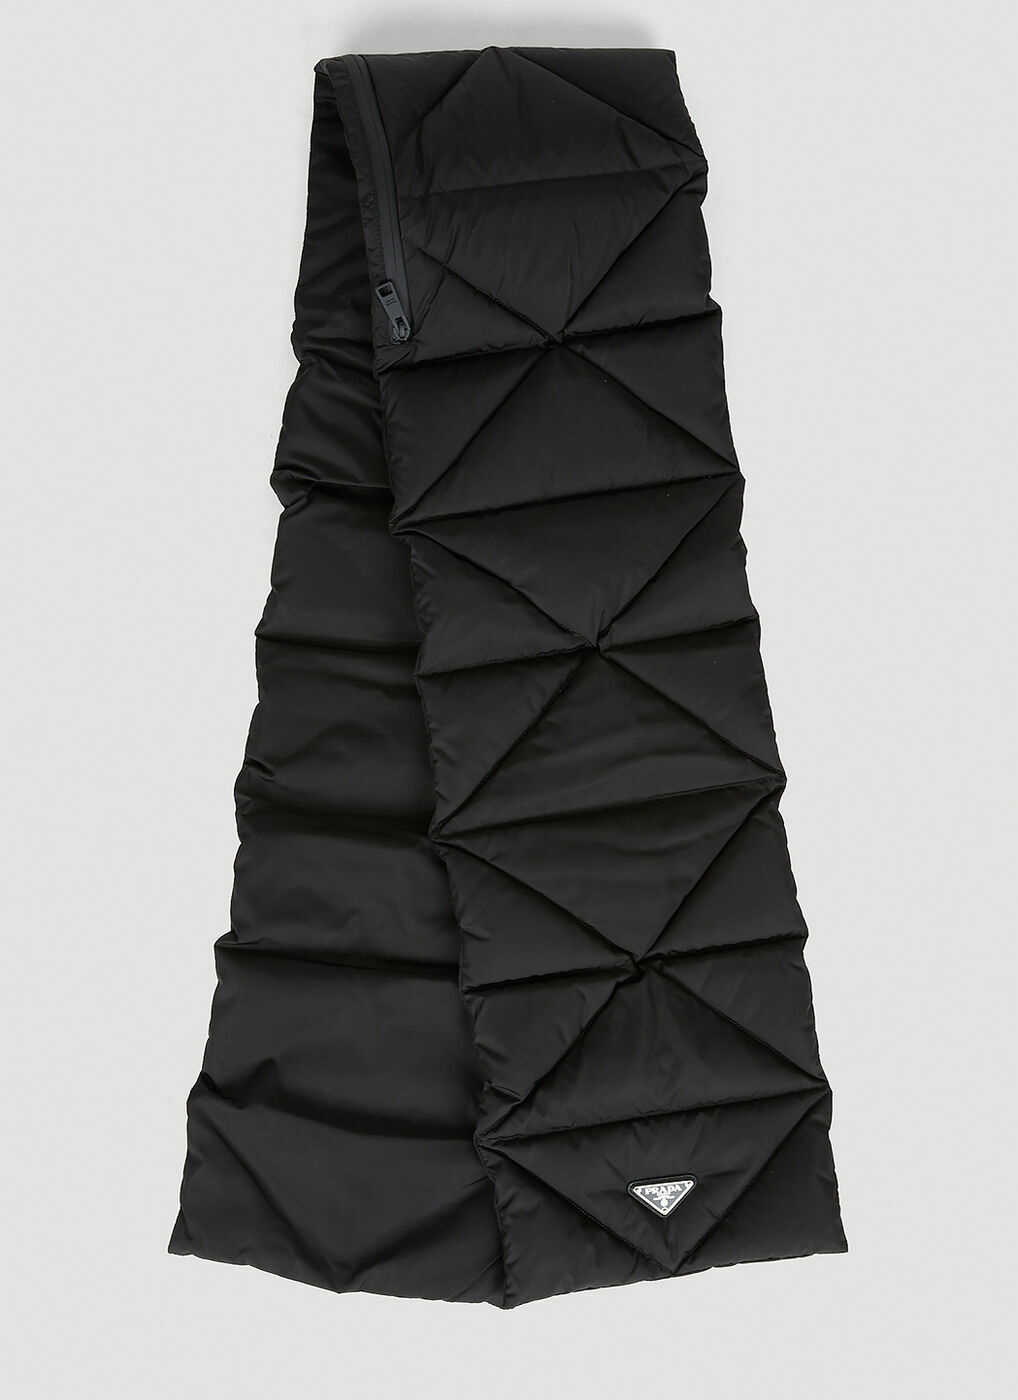 Re-Nylon Quilted Hooded Scarf in Black Prada